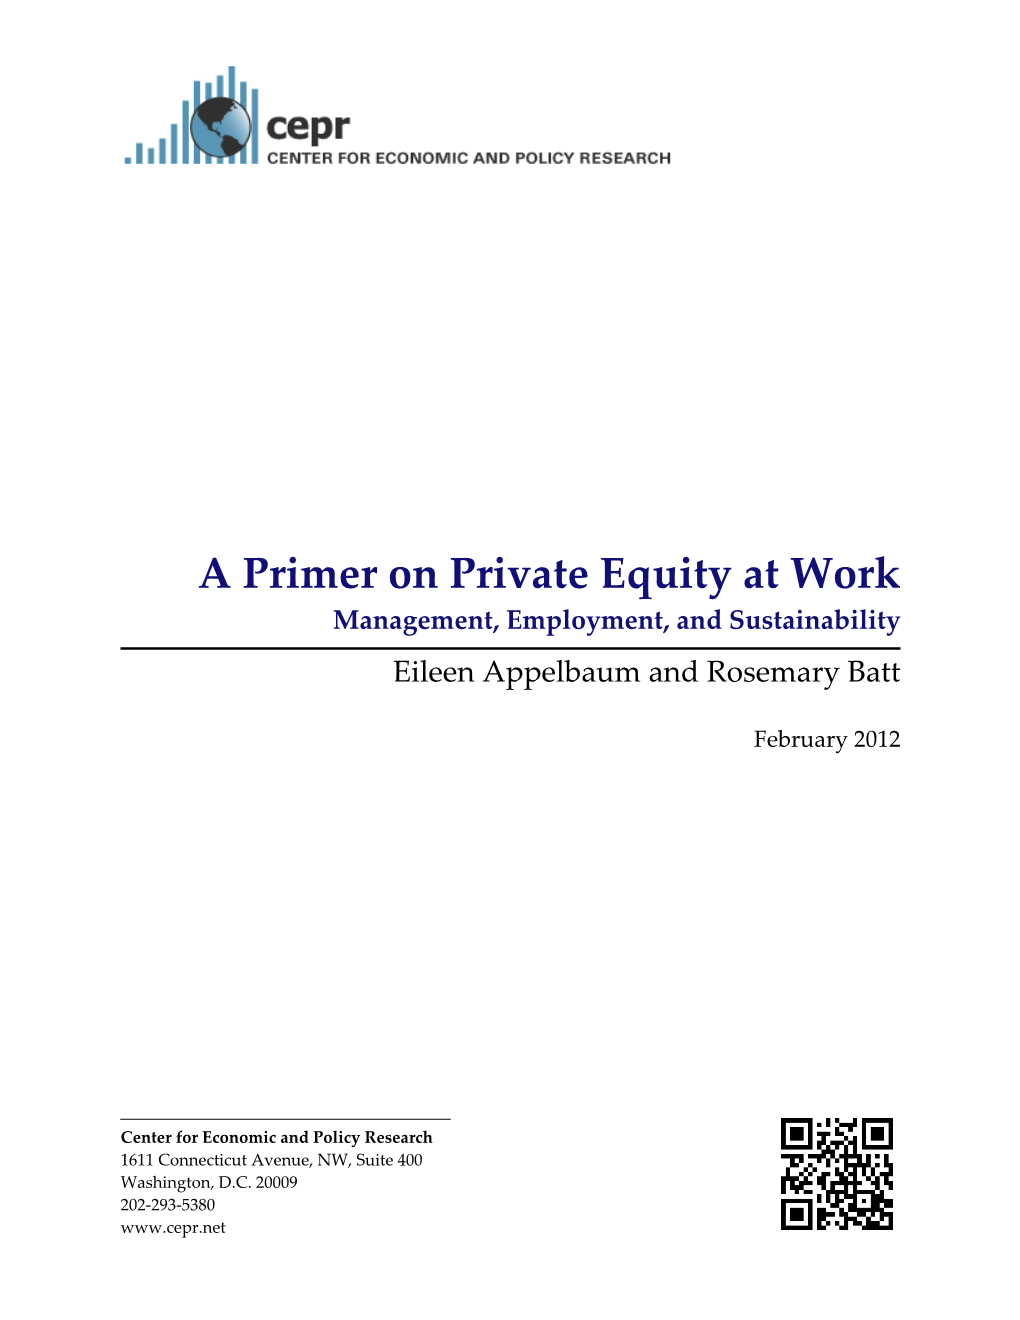 A Primer on Private Equity at Work Management, Employment, and Sustainability Eileen Appelbaum and Rosemary Batt